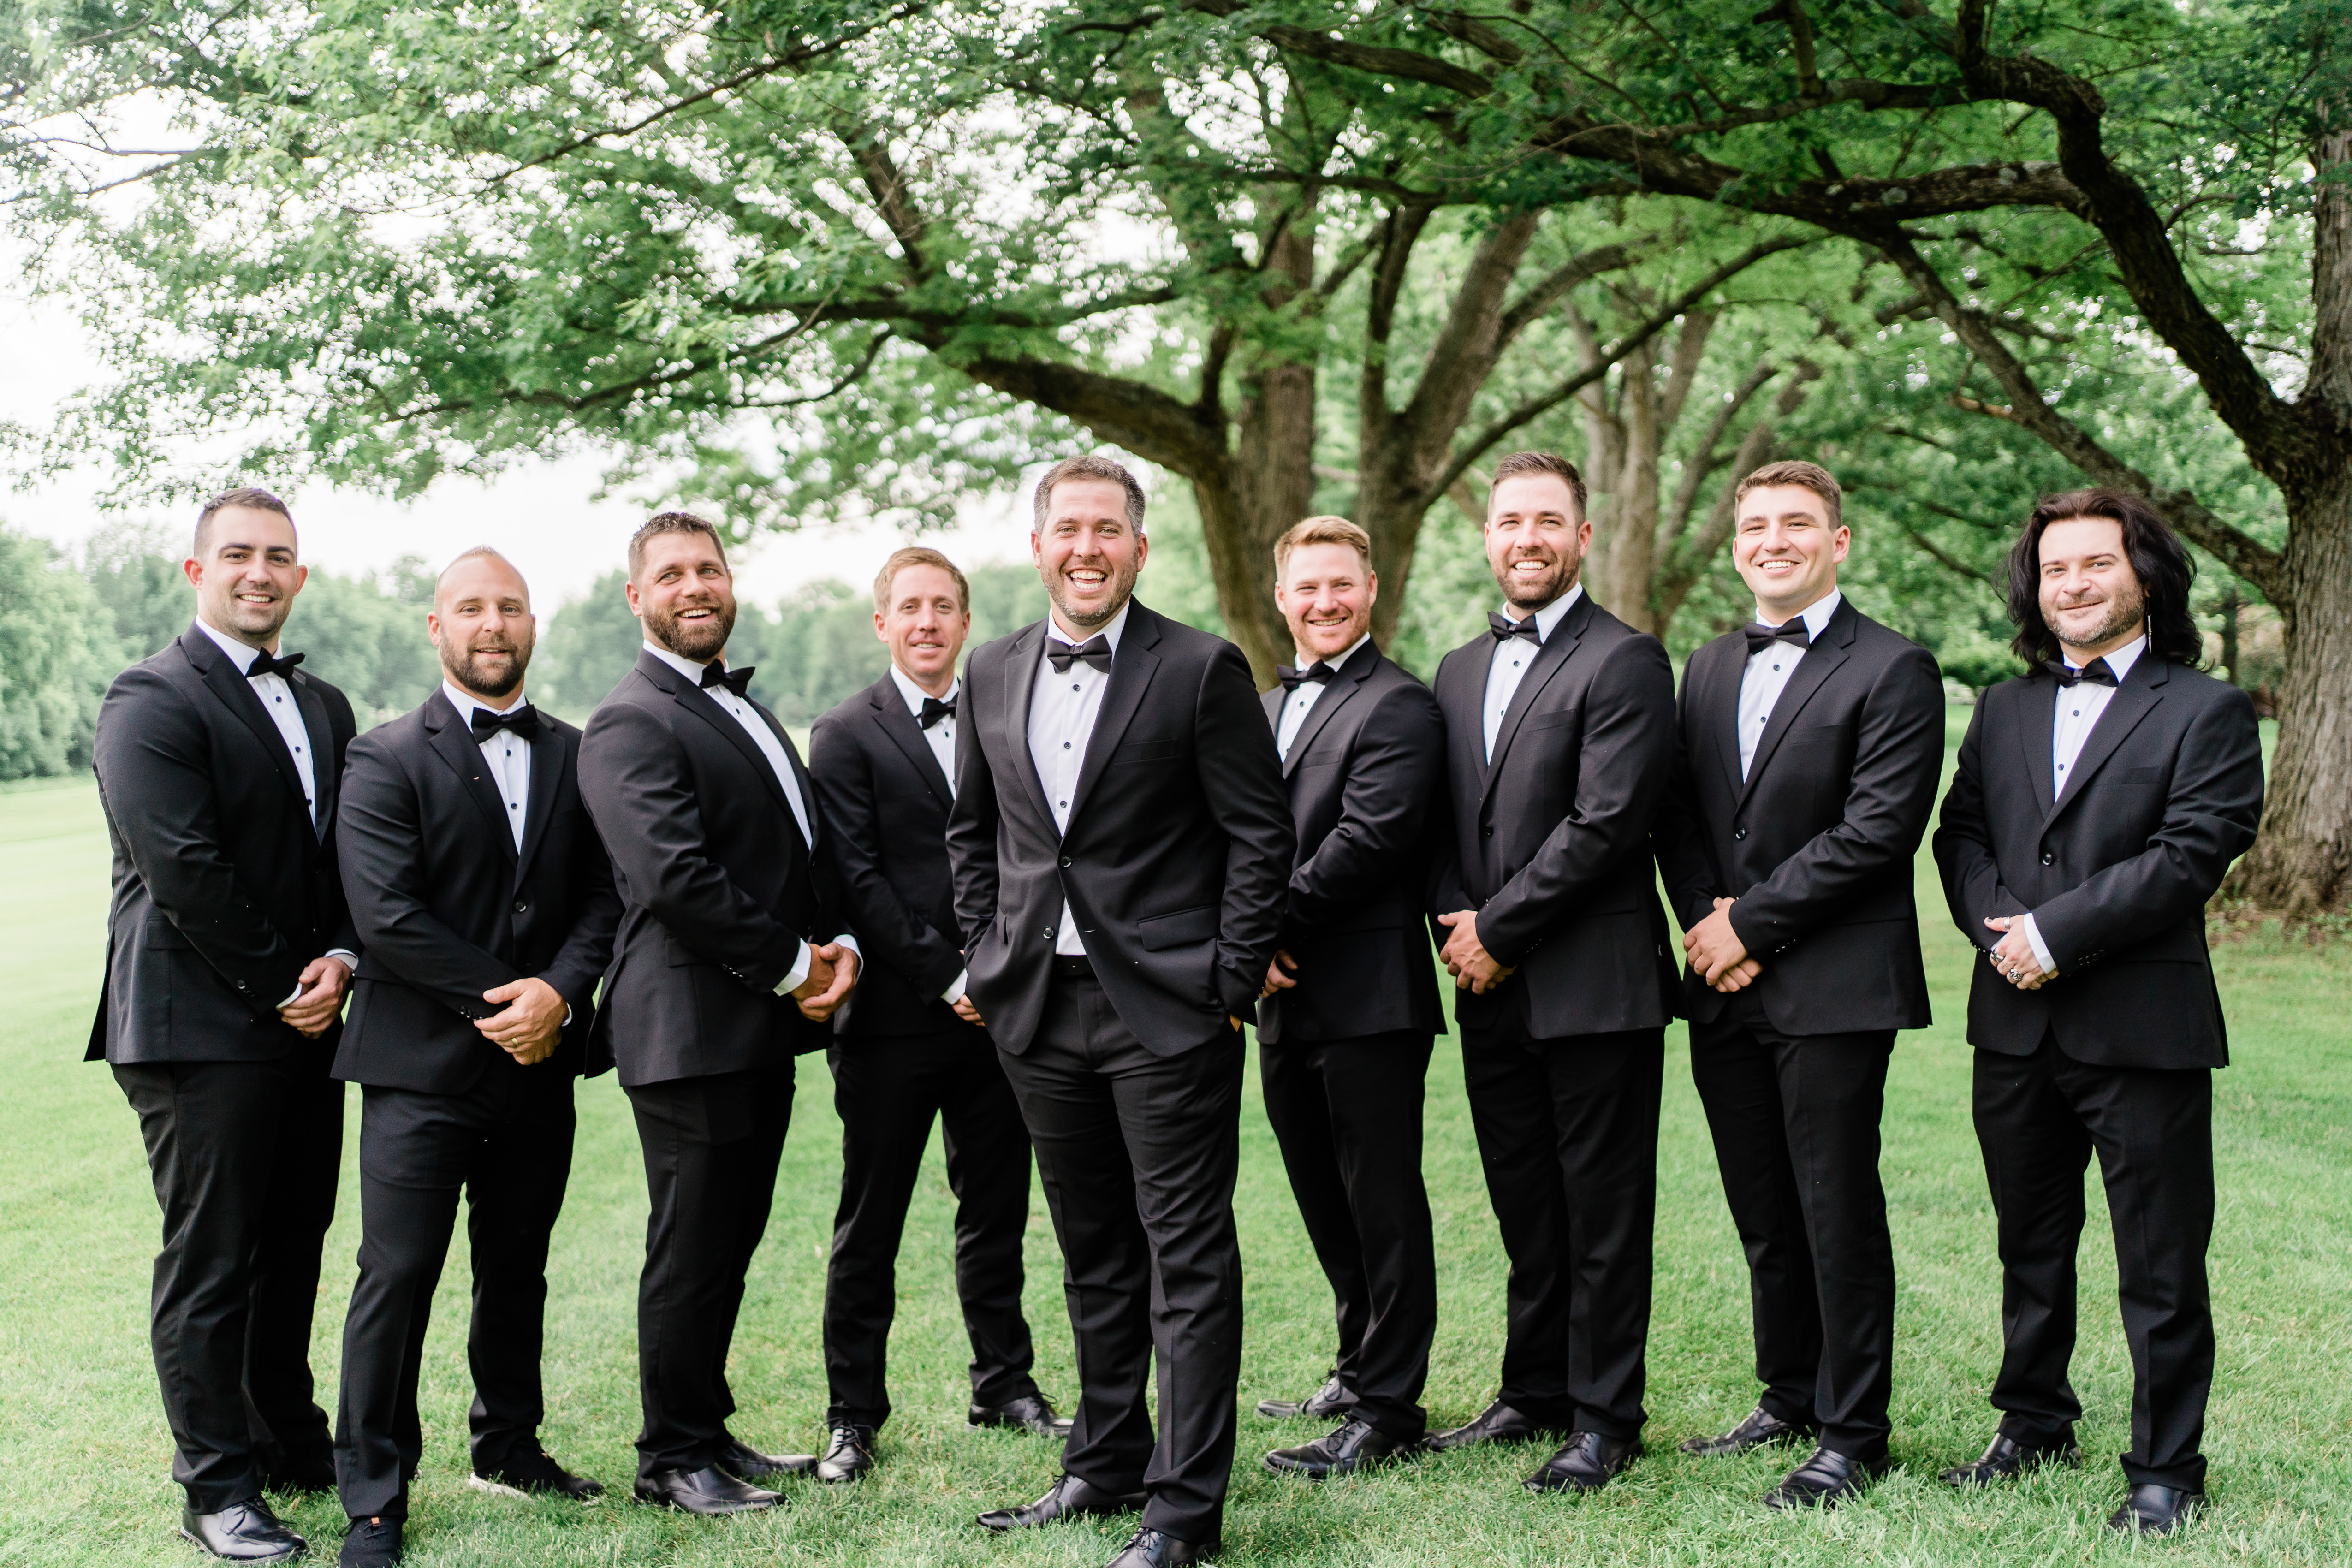 groom and groomsmen standing together wearing tuxedos